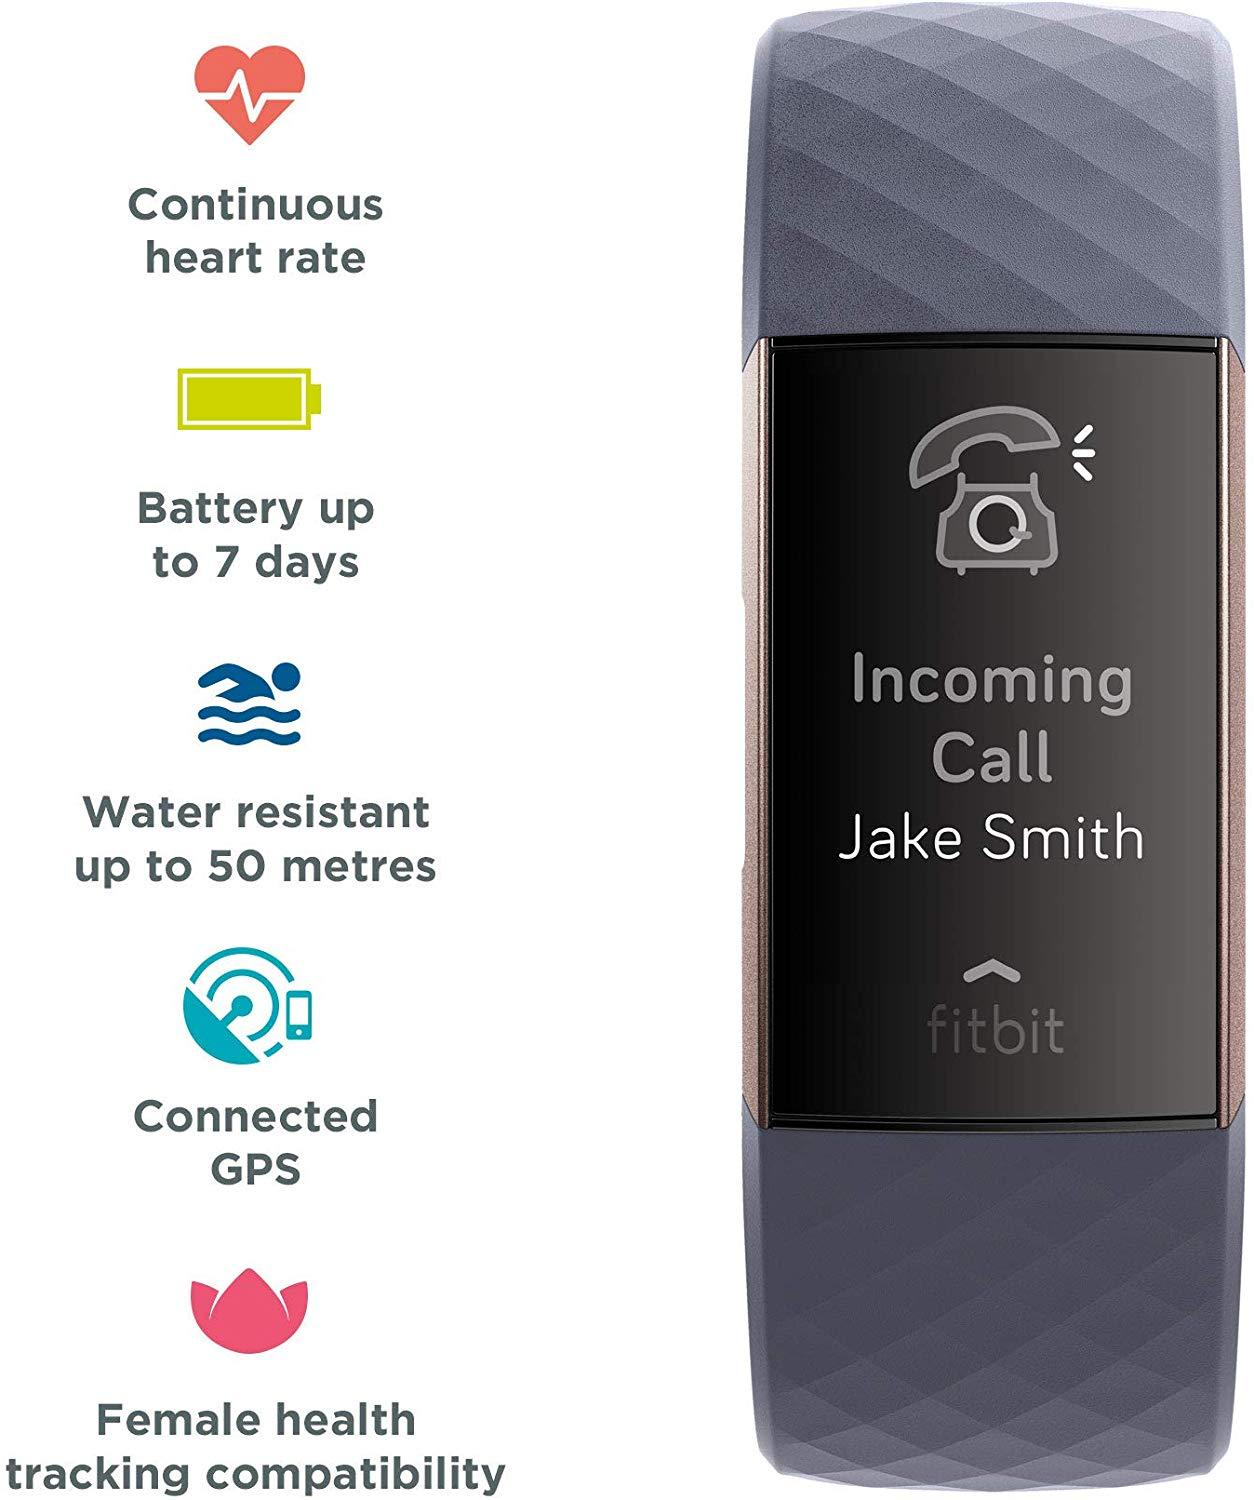 connected gps is running fitbit charge 3